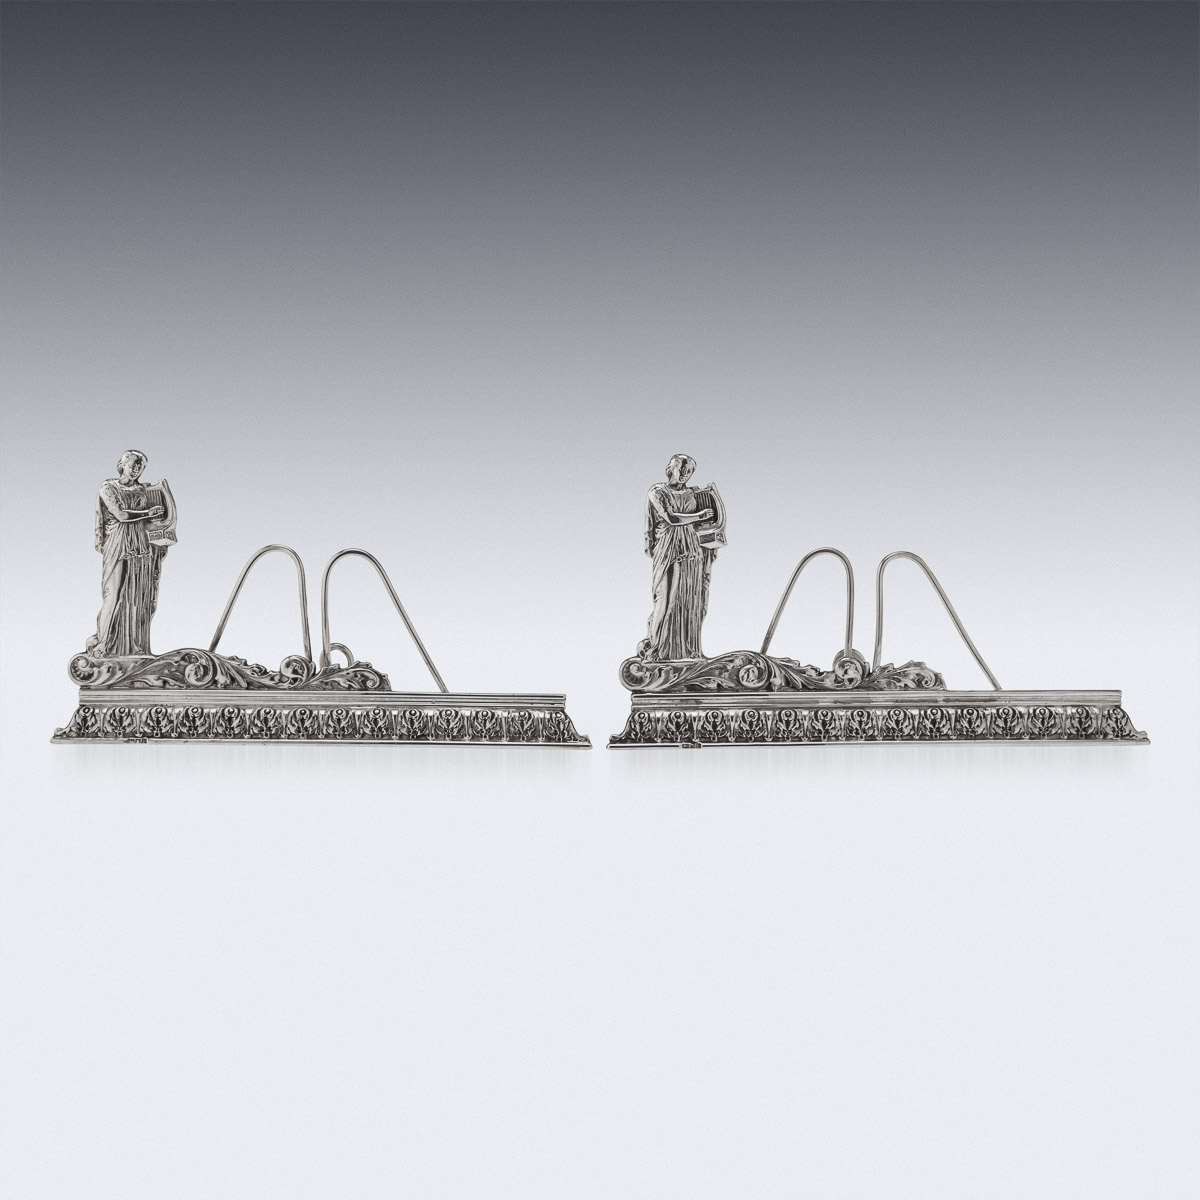 A PAIR OF STERLING SILVER MUSIC SHEET STANDS, CARRINGTON & CO. C. 1910 - Image 12 of 16